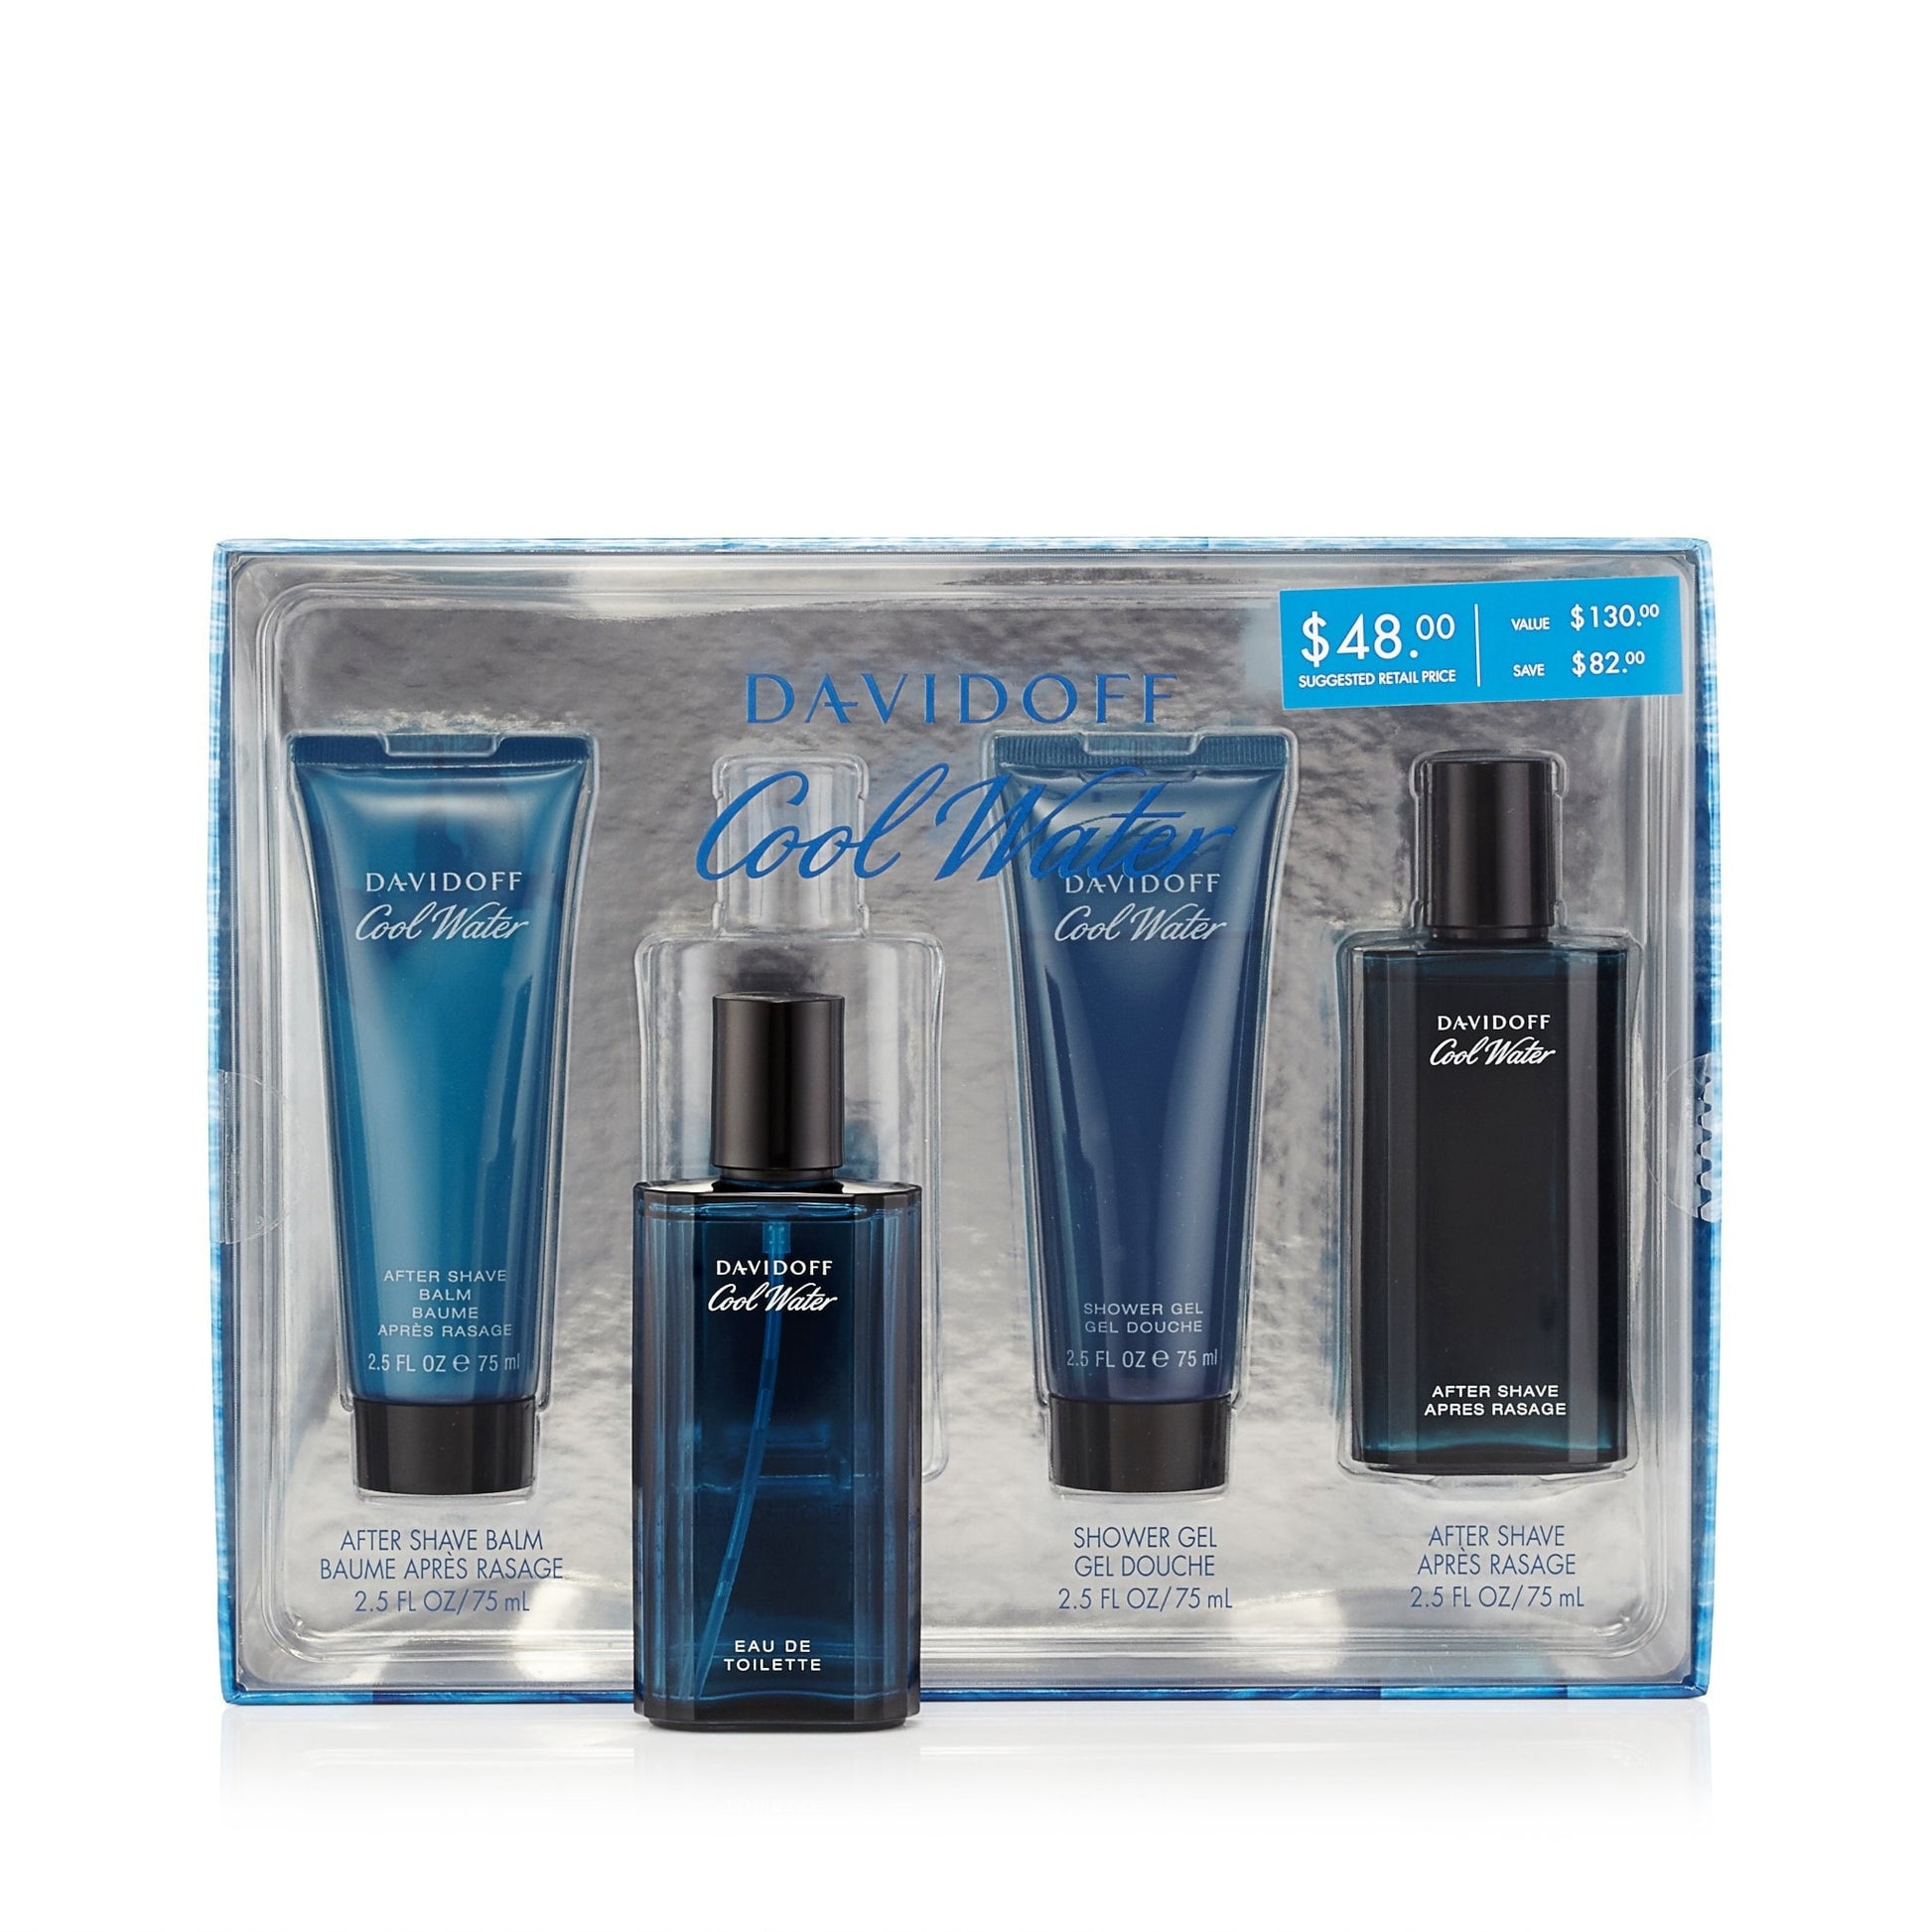 Cool Water Gift Set for Men by Davidoff 2.5 oz. Click to open in modal